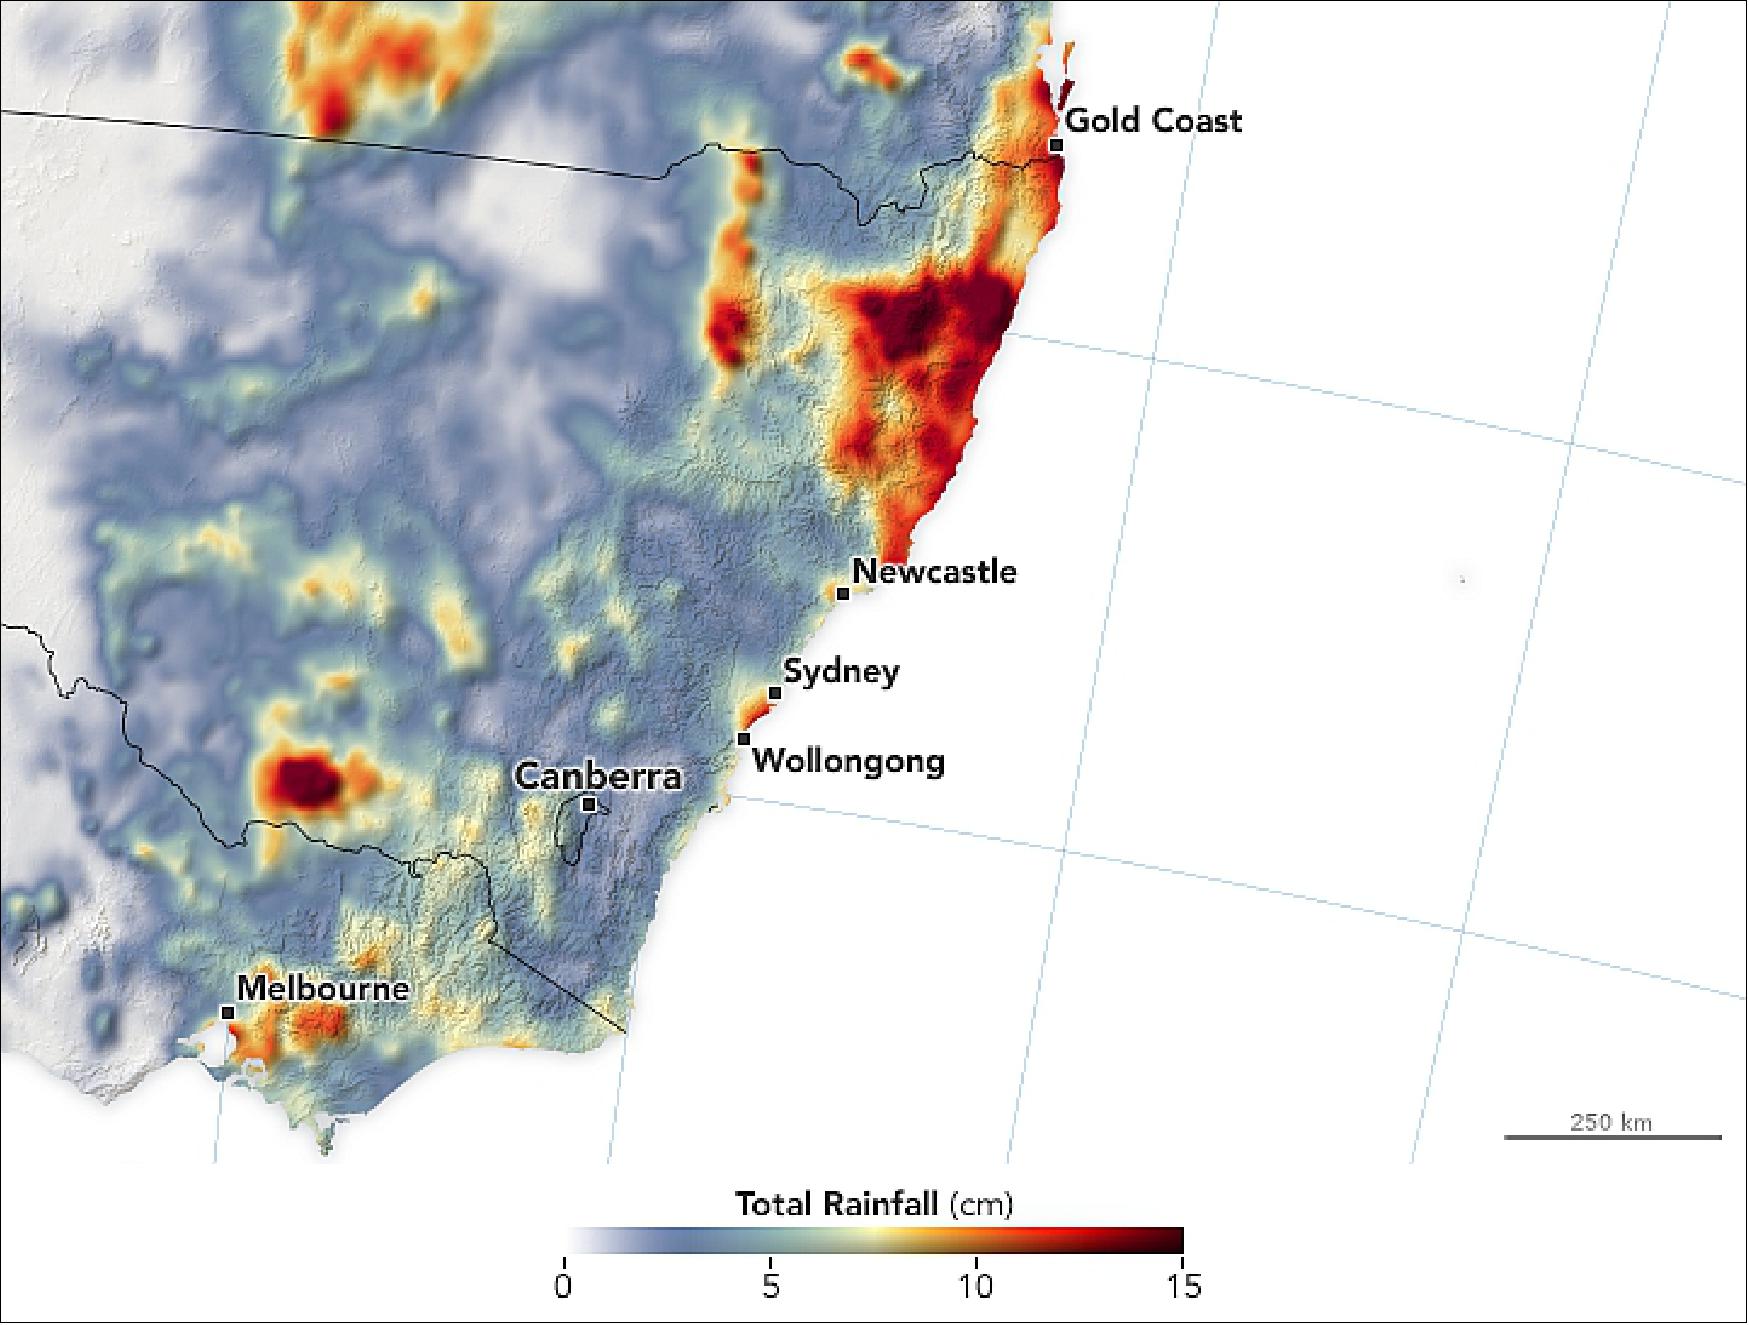 Figure 25: Bushfire counts dipped in mid-January when much-needed rainfall poured down on New South Wales and Victoria. The map shows rainfall accumulation from January 15-21, 2020, in New South Wales and neighboring states. These data are remotely-sensed estimates that come from the Integrated Multi-Satellite Retrievals for GPM (IMERG), a product of the Global Precipitation Measurement (GPM) mission. Local rainfall amounts can be significantly higher when measured from the ground (image credit: NASA Earth Observatory, image by Joshua Stevens, using IMERG data from the GPM mission at NASA/GSFC. Story by Kathryn Hansen)